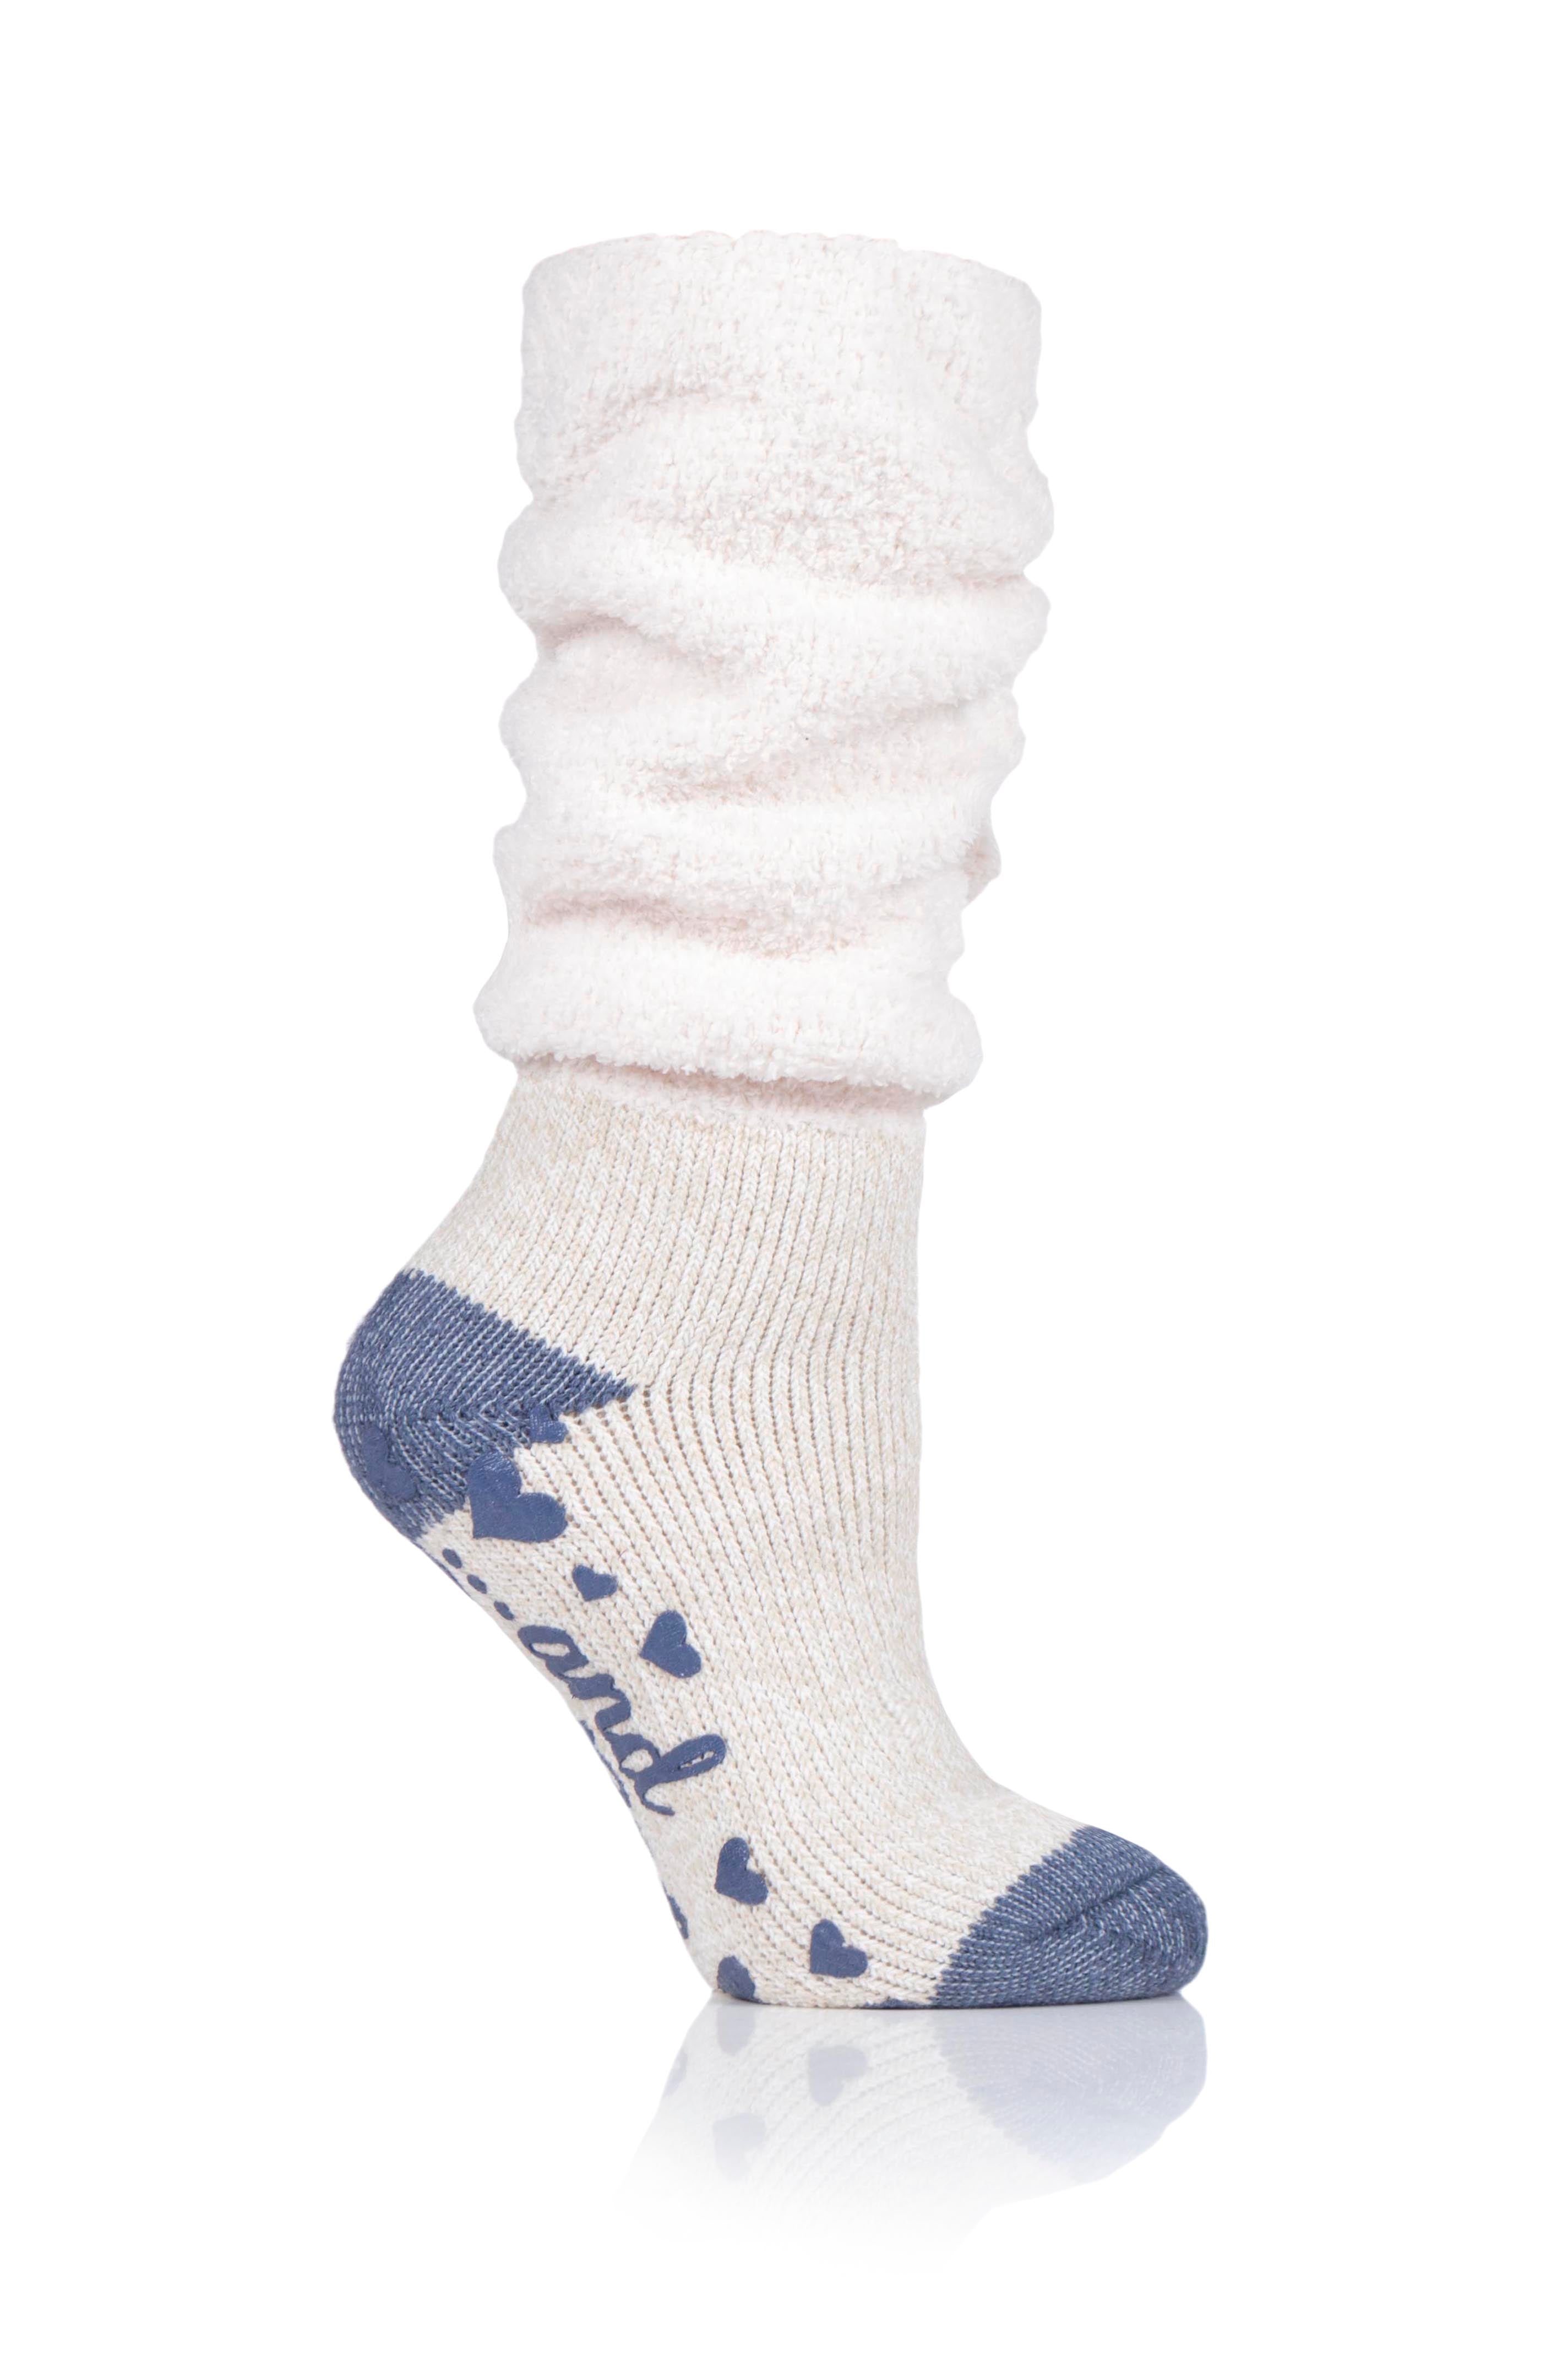 HEAT HOLDERS Lounge Slipper Socks With Comfy Slouch Top - Women's